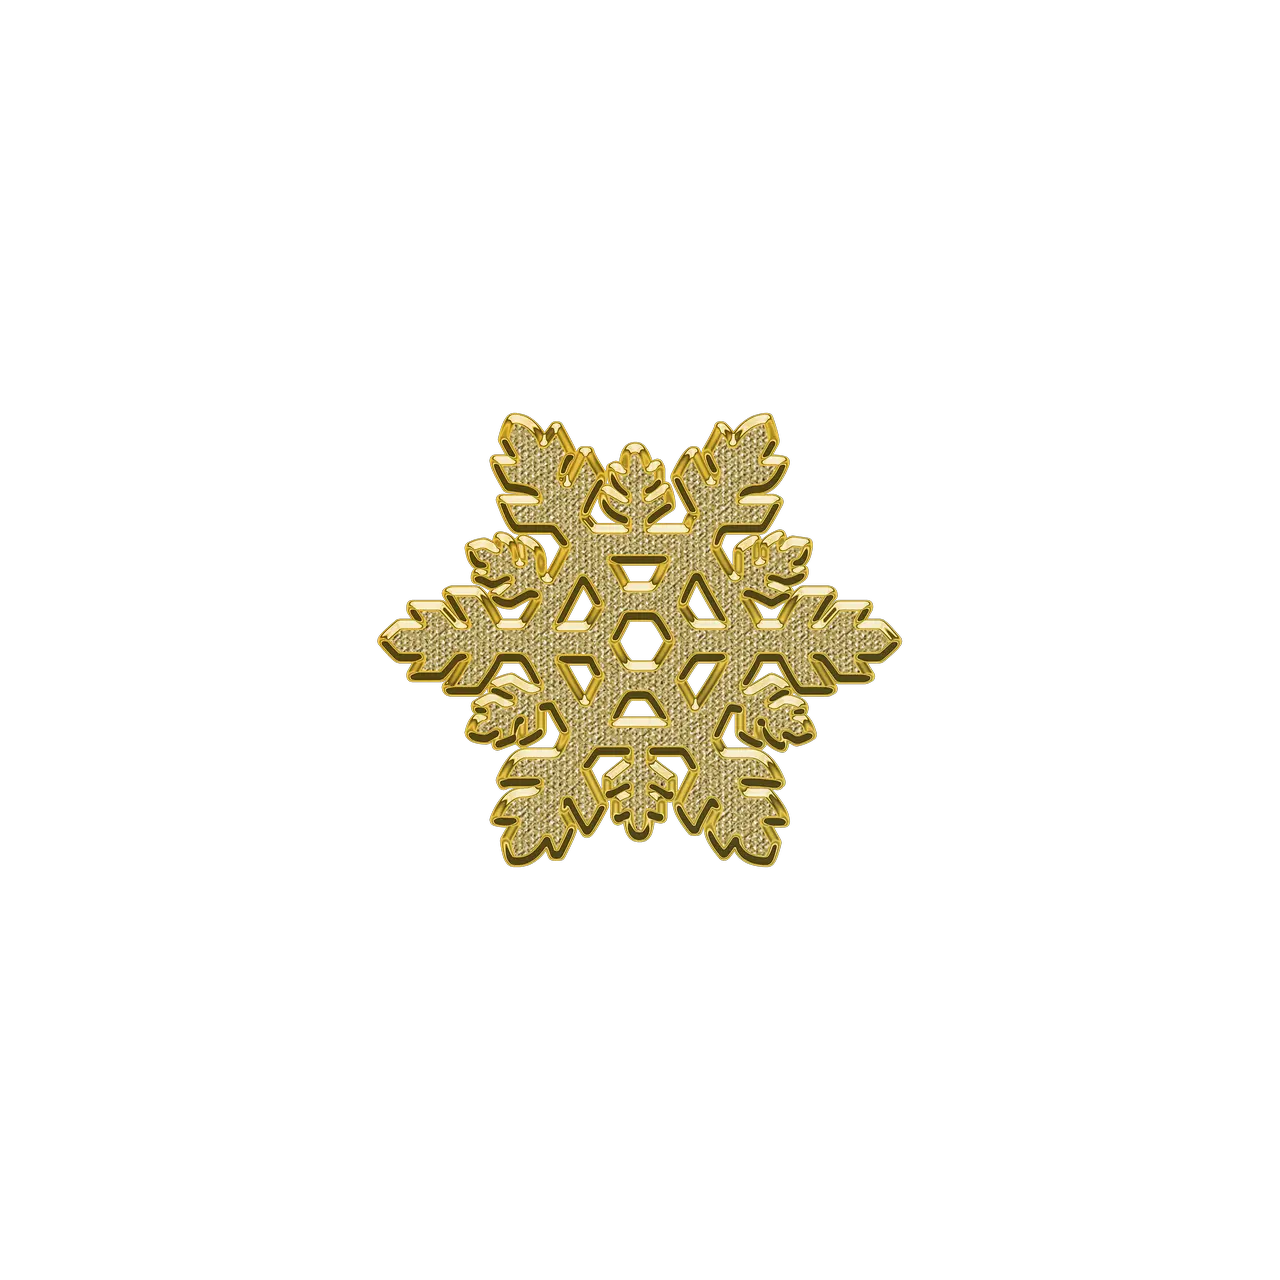 Download Hd Gold Snowflake Png Transparent Background Portable Network Graphics Snowflakes Transparent Background